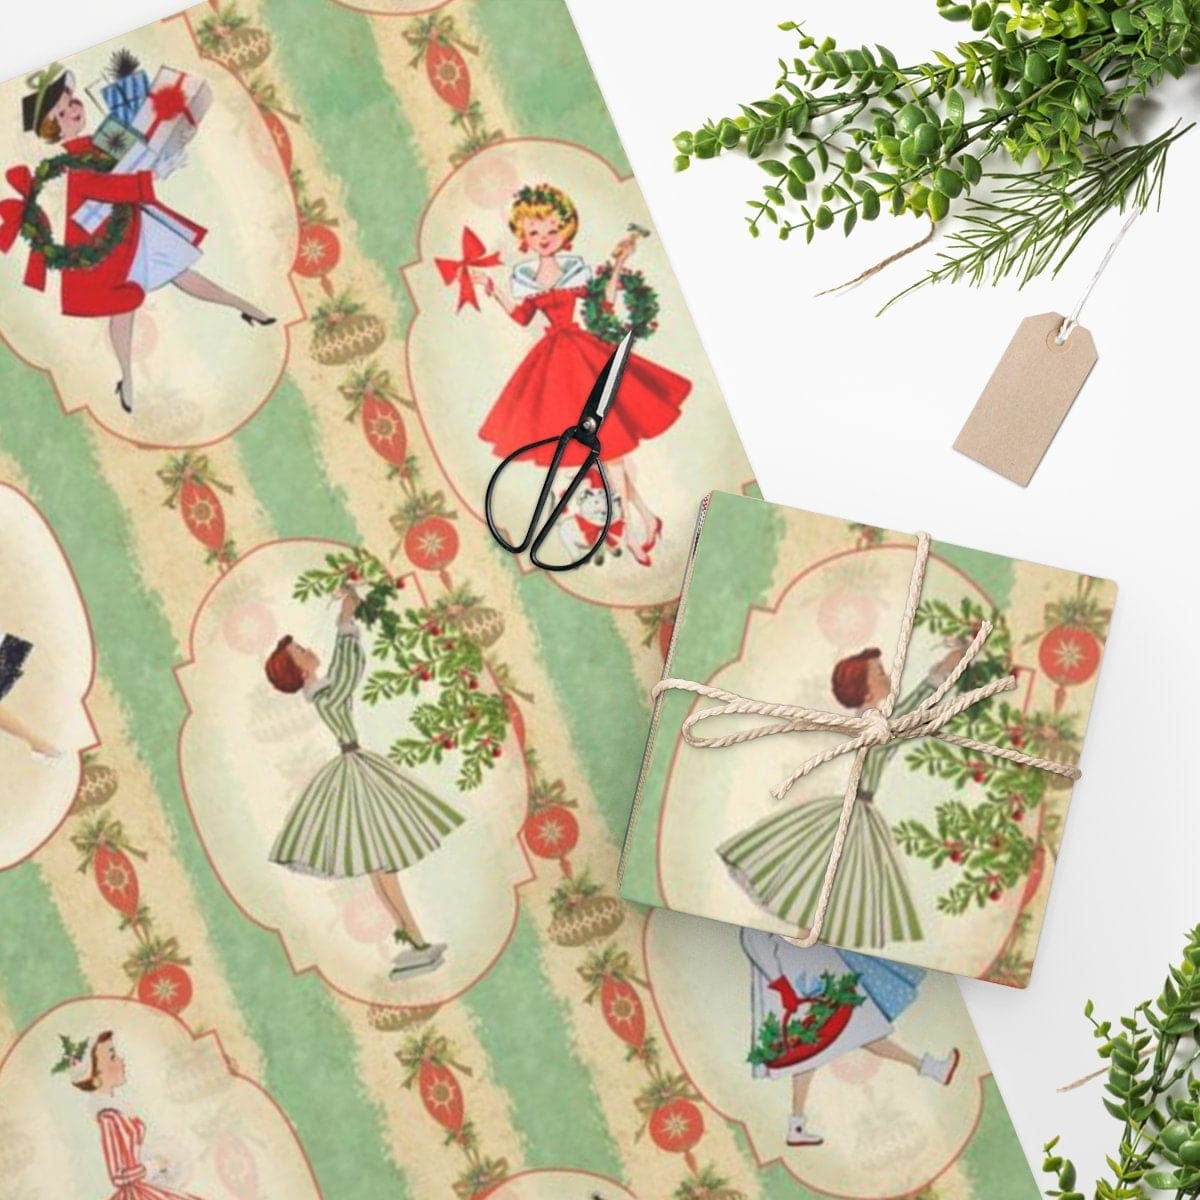 Vintage 1950s Christmas Wrapping Paper, Mid Century Modern Retro Green,  Red, Women, Ladies, Housewives Holiday Gift Wrap